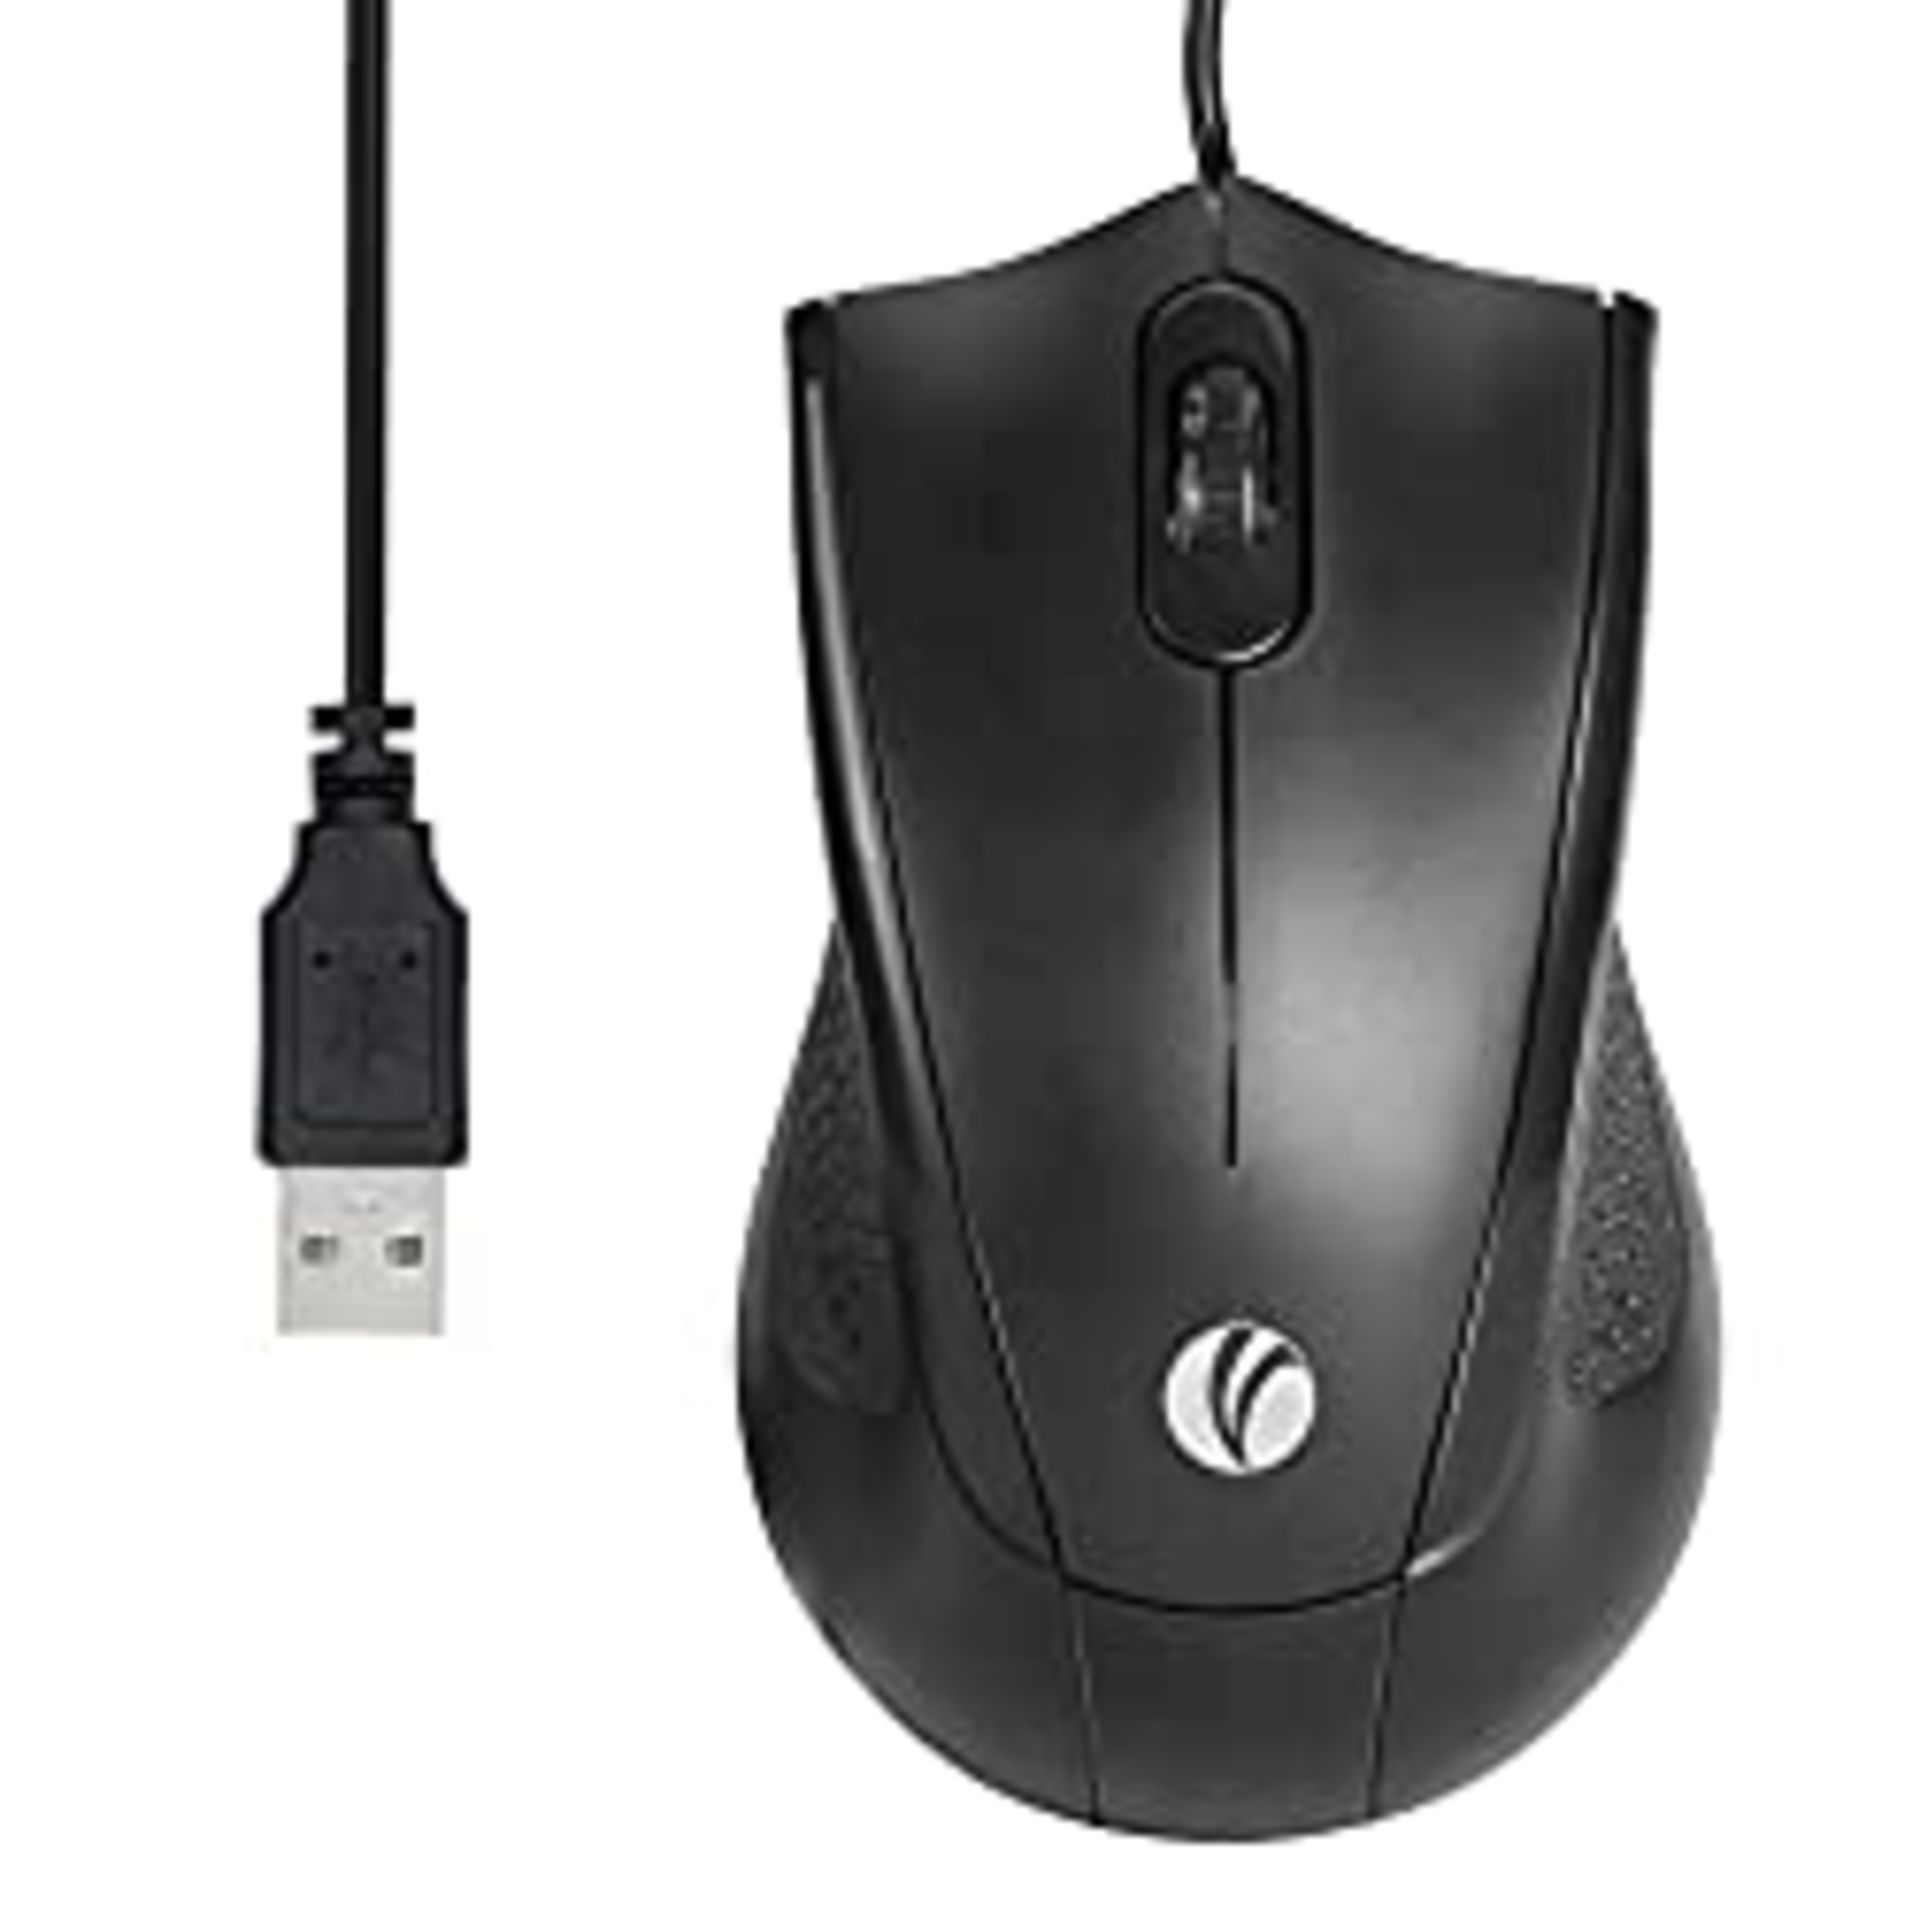 RRP £8.03 VCOM Wired USB Mouse with 1200 DPI & 1.8 Meter Cord